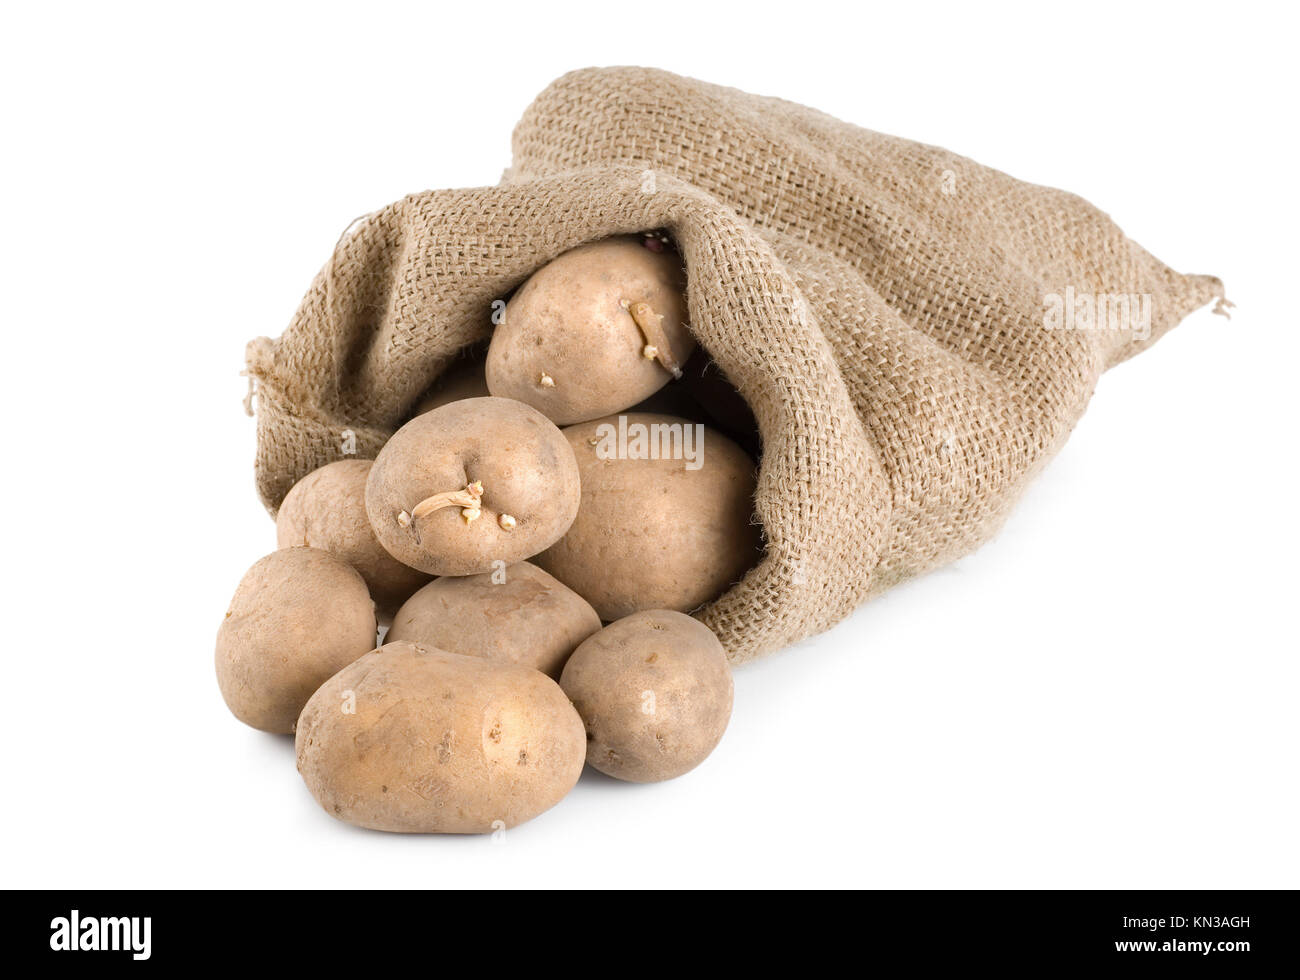 Raw potatoes in a hessian sack isolated on a white background. Stock Photo